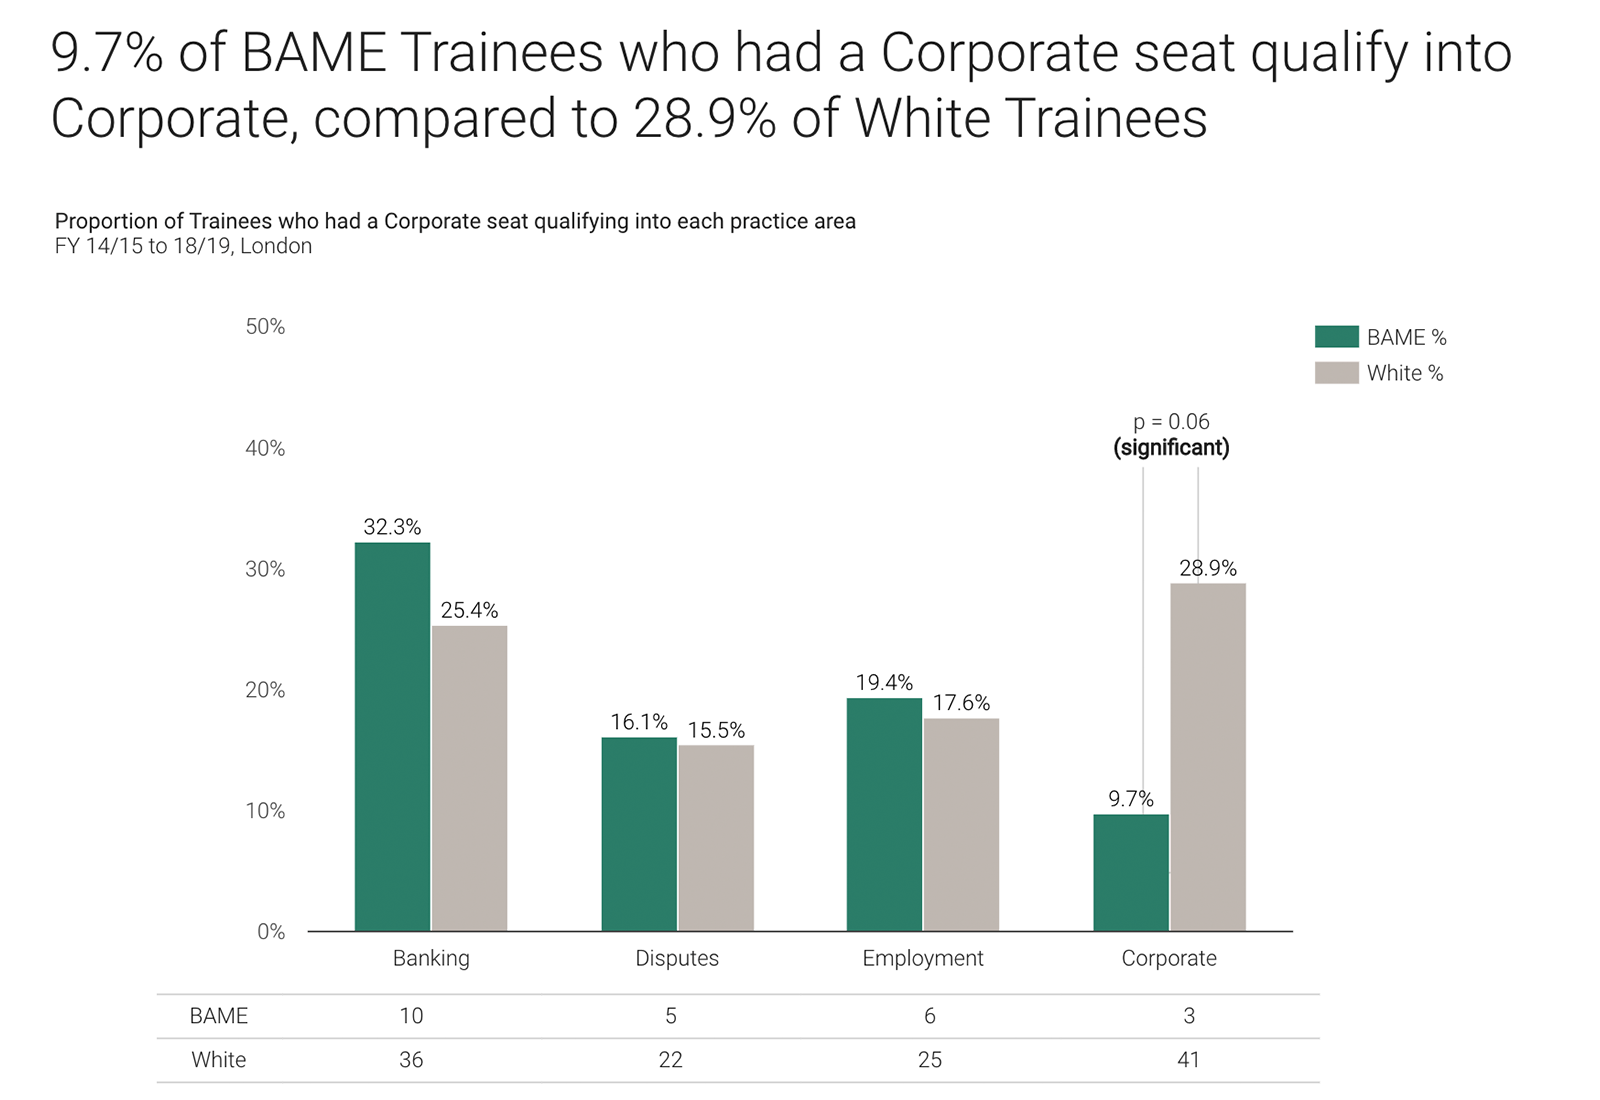 ‘9.7% of BAME trainees who had a Corporate seat qualify into Corporate, compared to 28.9% of White trainees’. Fictional data for illustration only.